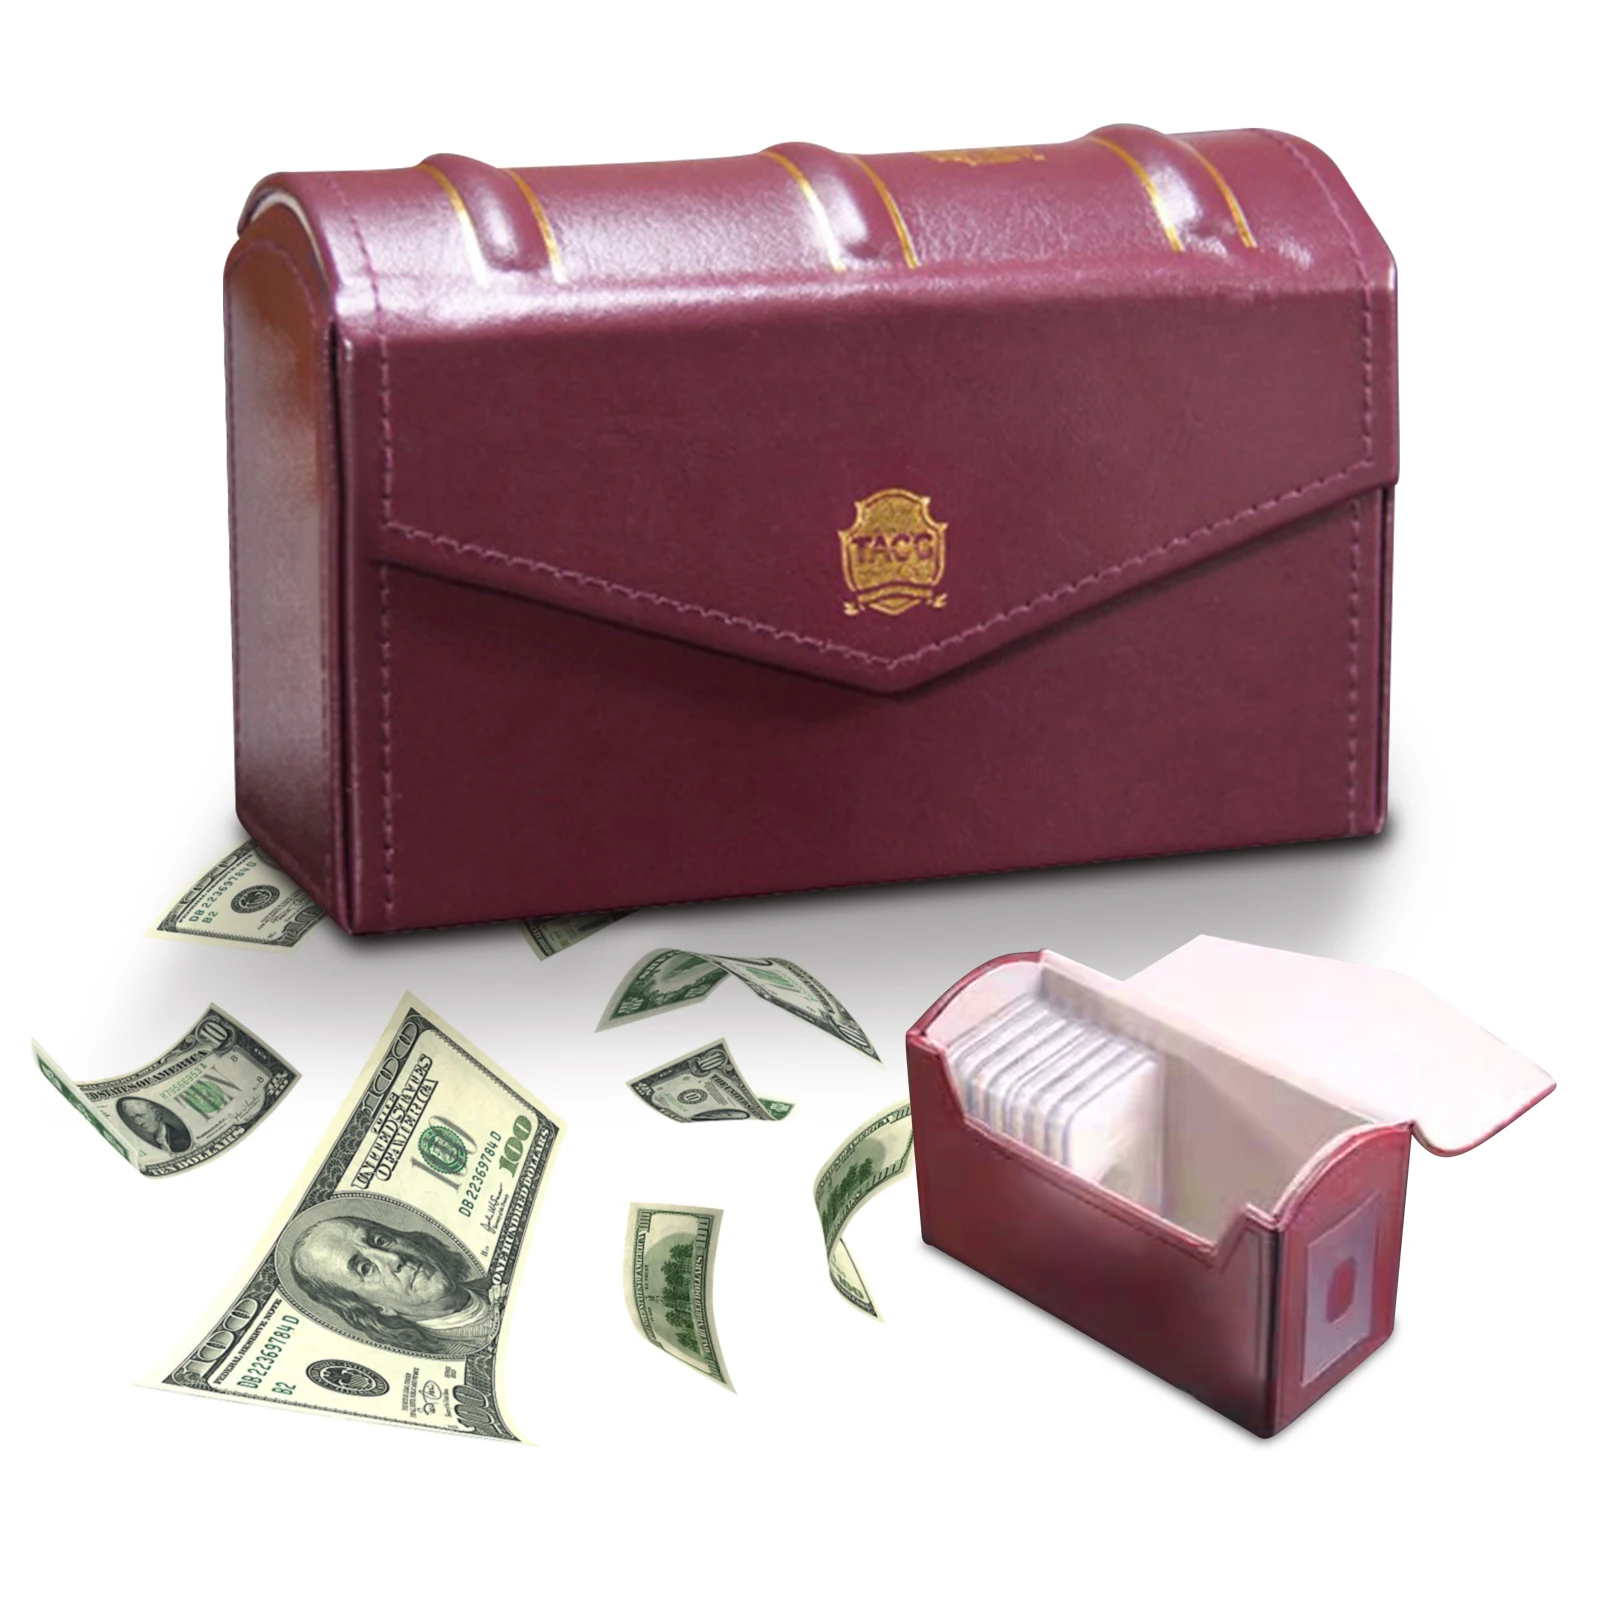 

Collection Box PU Leather Storage Gifts Label Paper Money Coins Currency Holder Folder Case PMG Graded Banknotes Pocket